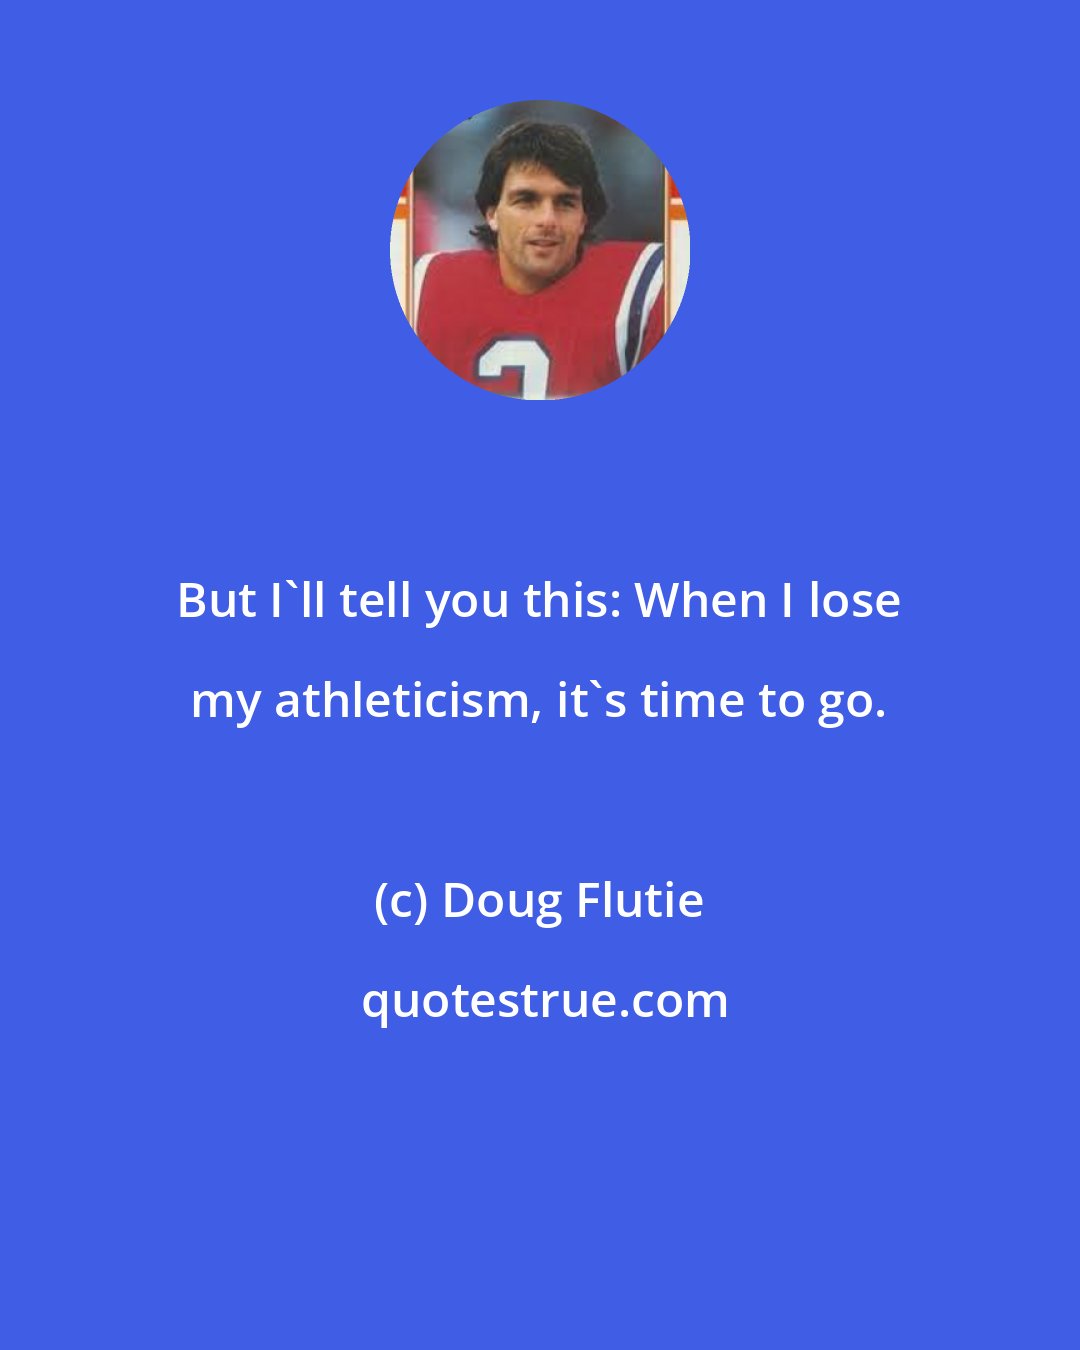 Doug Flutie: But I'll tell you this: When I lose my athleticism, it's time to go.